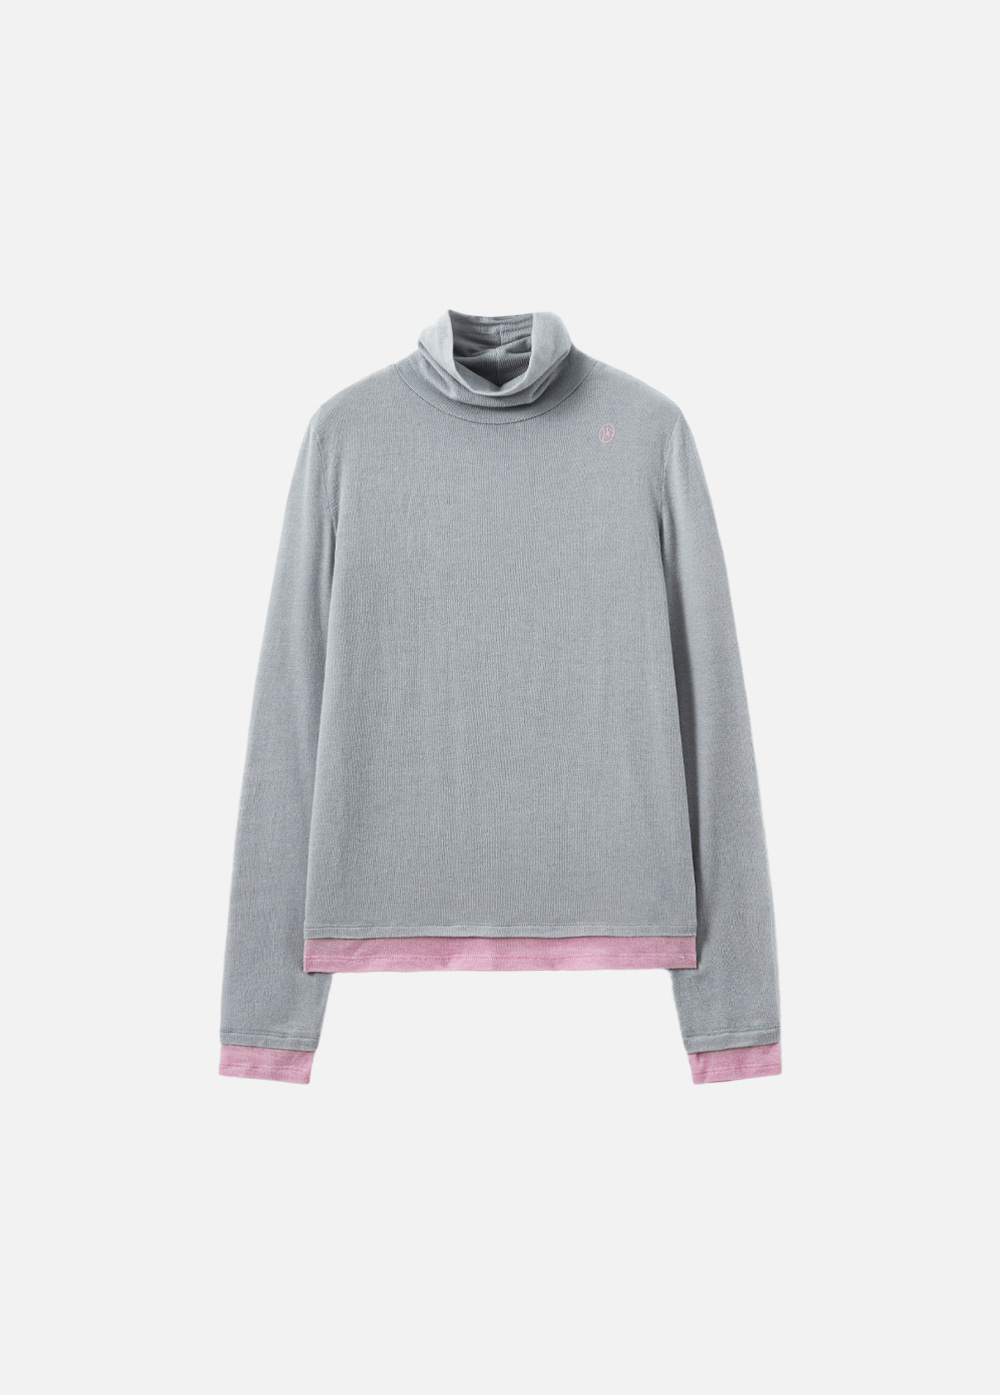 W LAYERED POINT TURTLE NECK LONG SLEEVE light gray